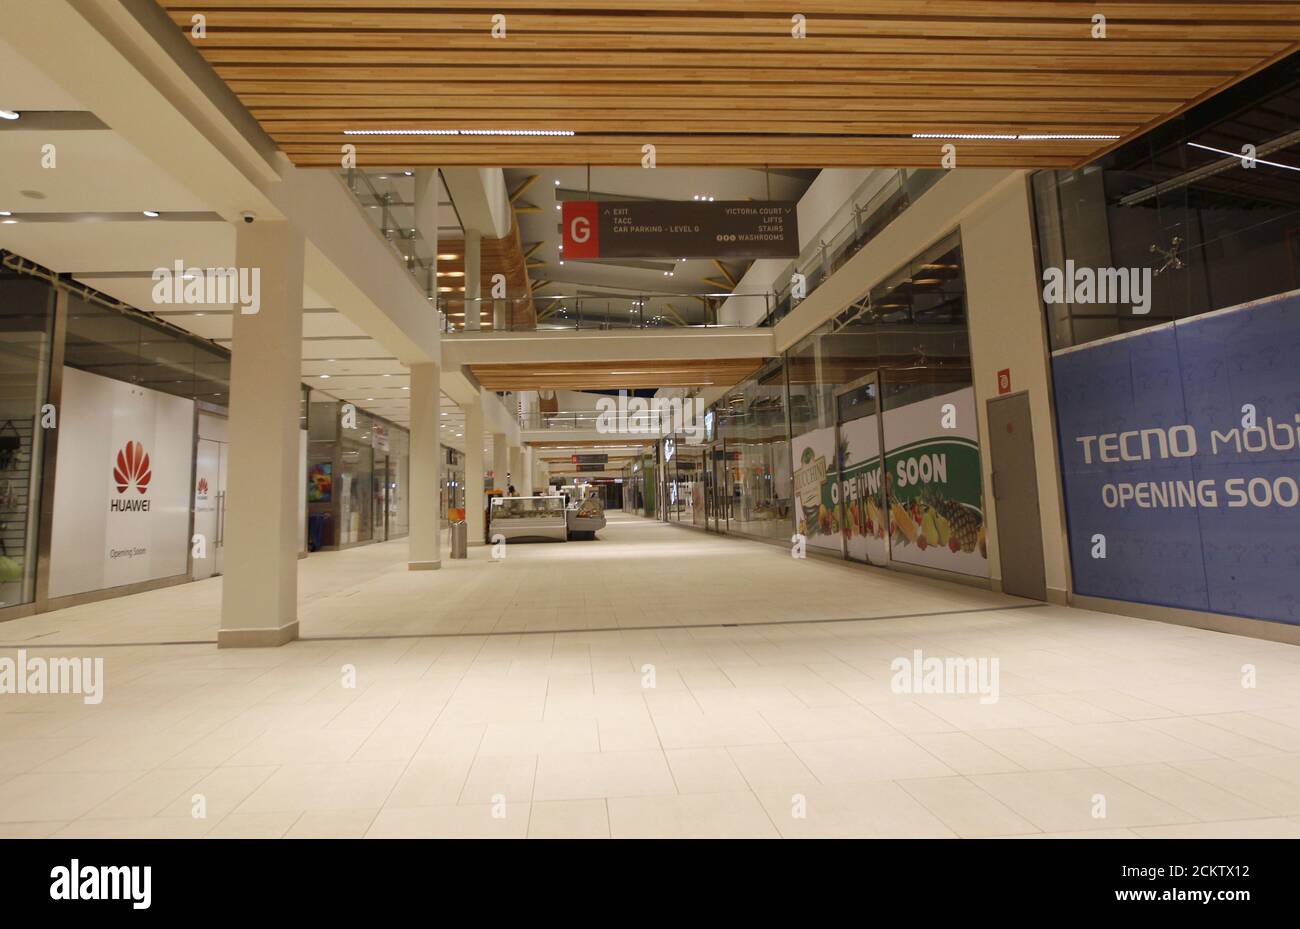 A general view shows the empty corridor inside of the evacuated Garden City shopping Mall in Kenya's capital Nairobi, September 8, 2015. A big, new shopping mall in the Kenyan capital Nairobi was evacuated on Tuesday when a man with a suspected home-made bomb was stopped by security guards, police and mall officials said. Police said three men have been arrested in relation to the incident at the Garden City Mall, which opened in May as part of a $250 million project. Kenyan malls have been on heightened alert since 2013 when four gunmen from Somali militant group al Shabaab attacked the Westg Stock Photo